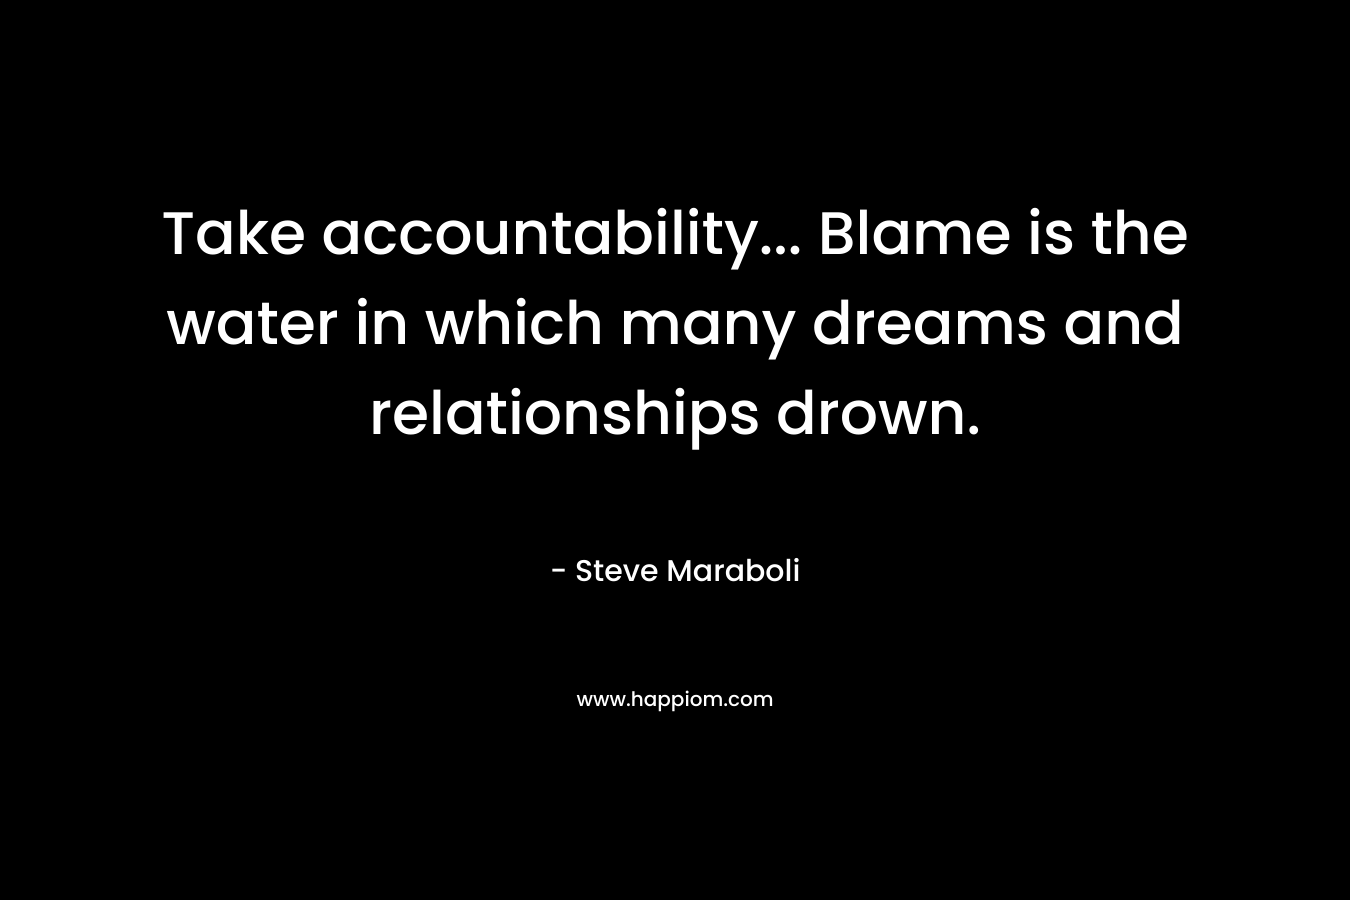 Take accountability... Blame is the water in which many dreams and relationships drown.